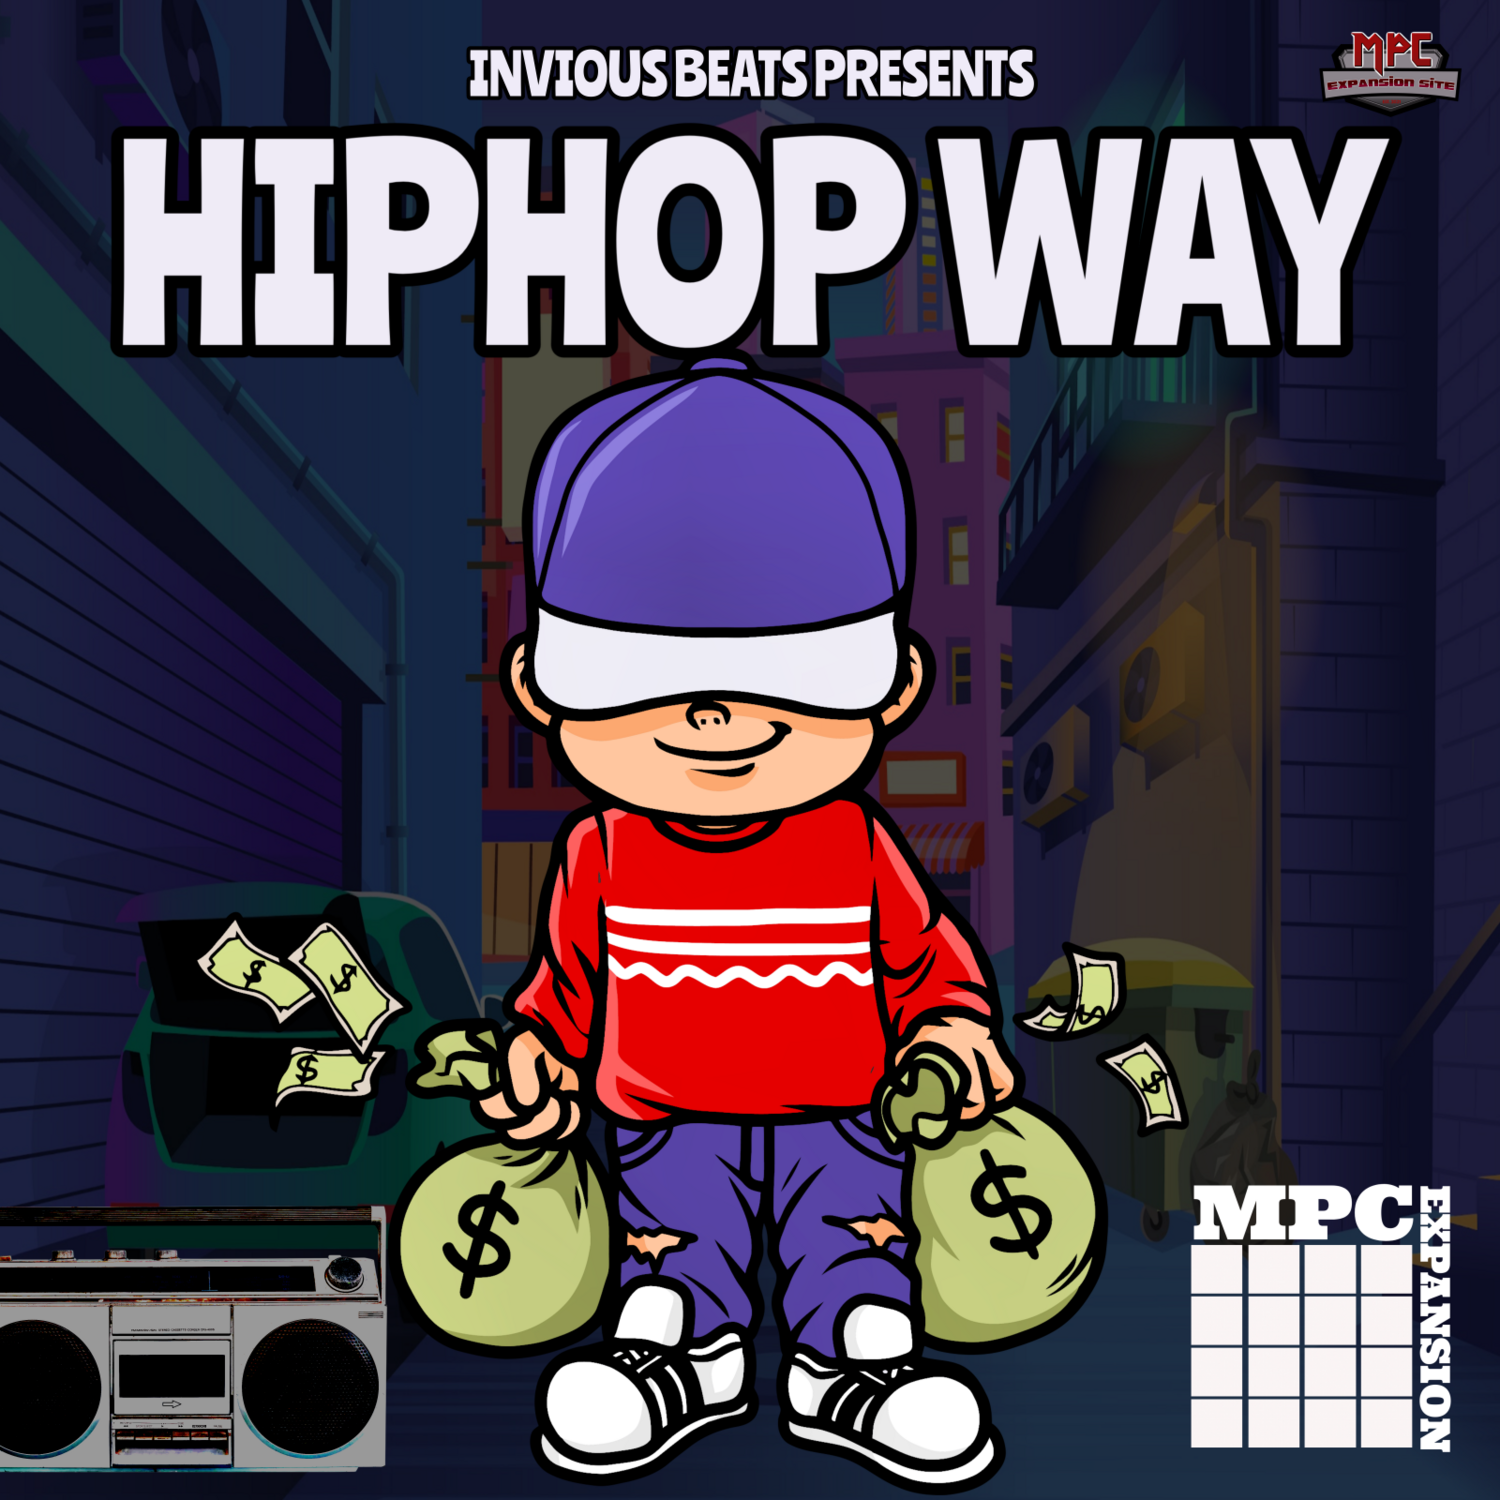 MPC EXPANSION 'HIPHOP WAY' by INVIOUS